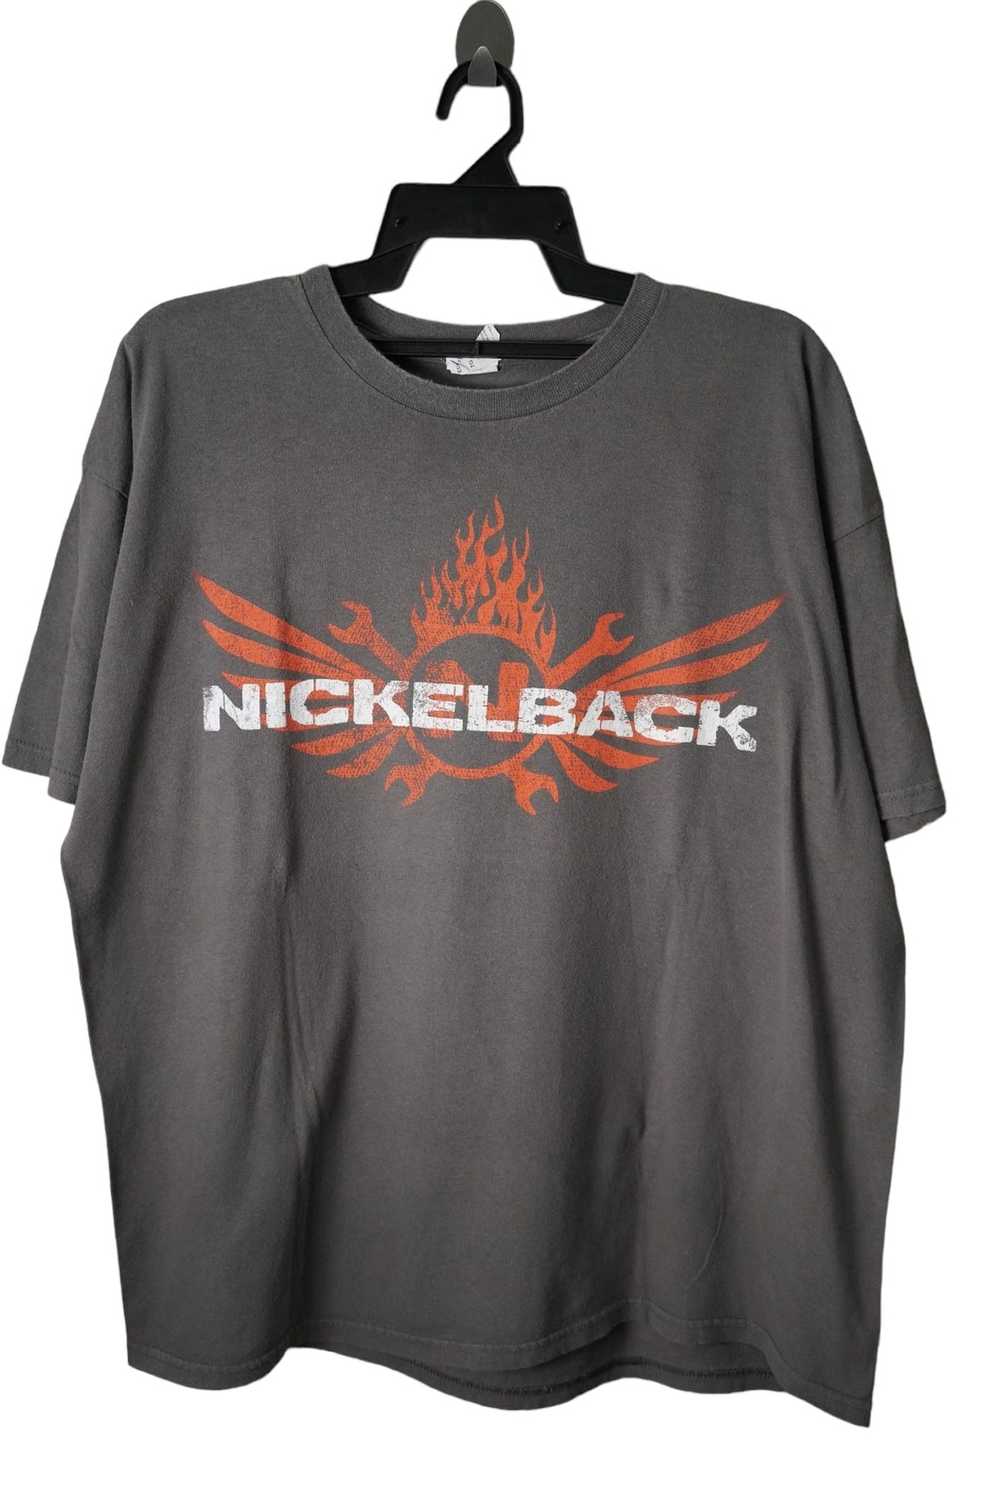 Band Tees × Tour Tee Nickelback Here and Now Nort… - image 2